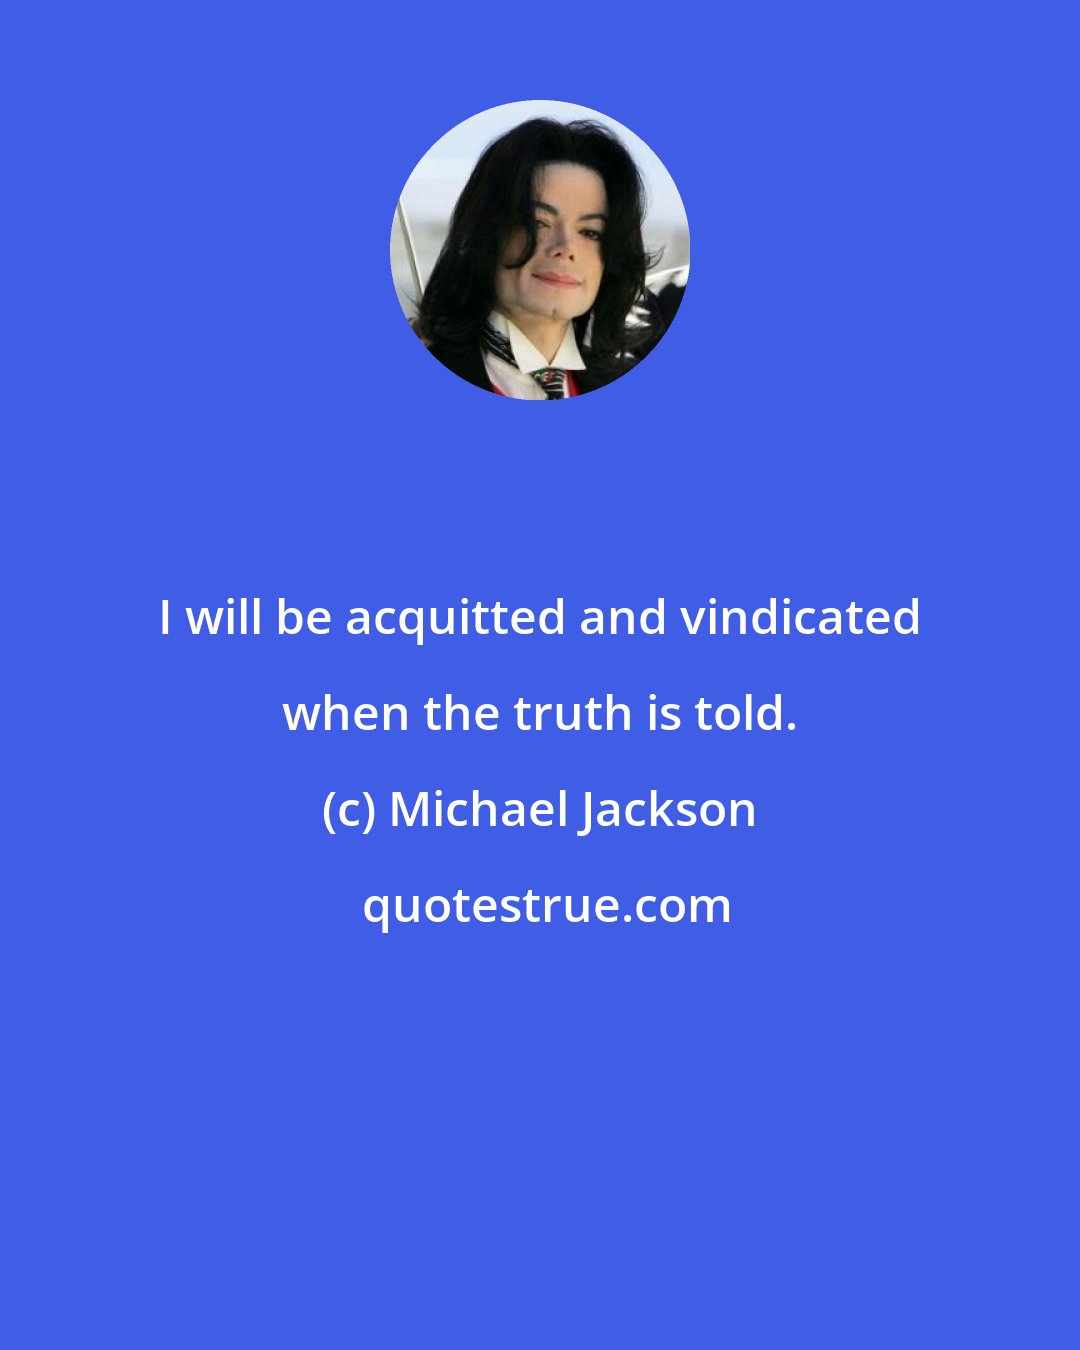 Michael Jackson: I will be acquitted and vindicated when the truth is told.